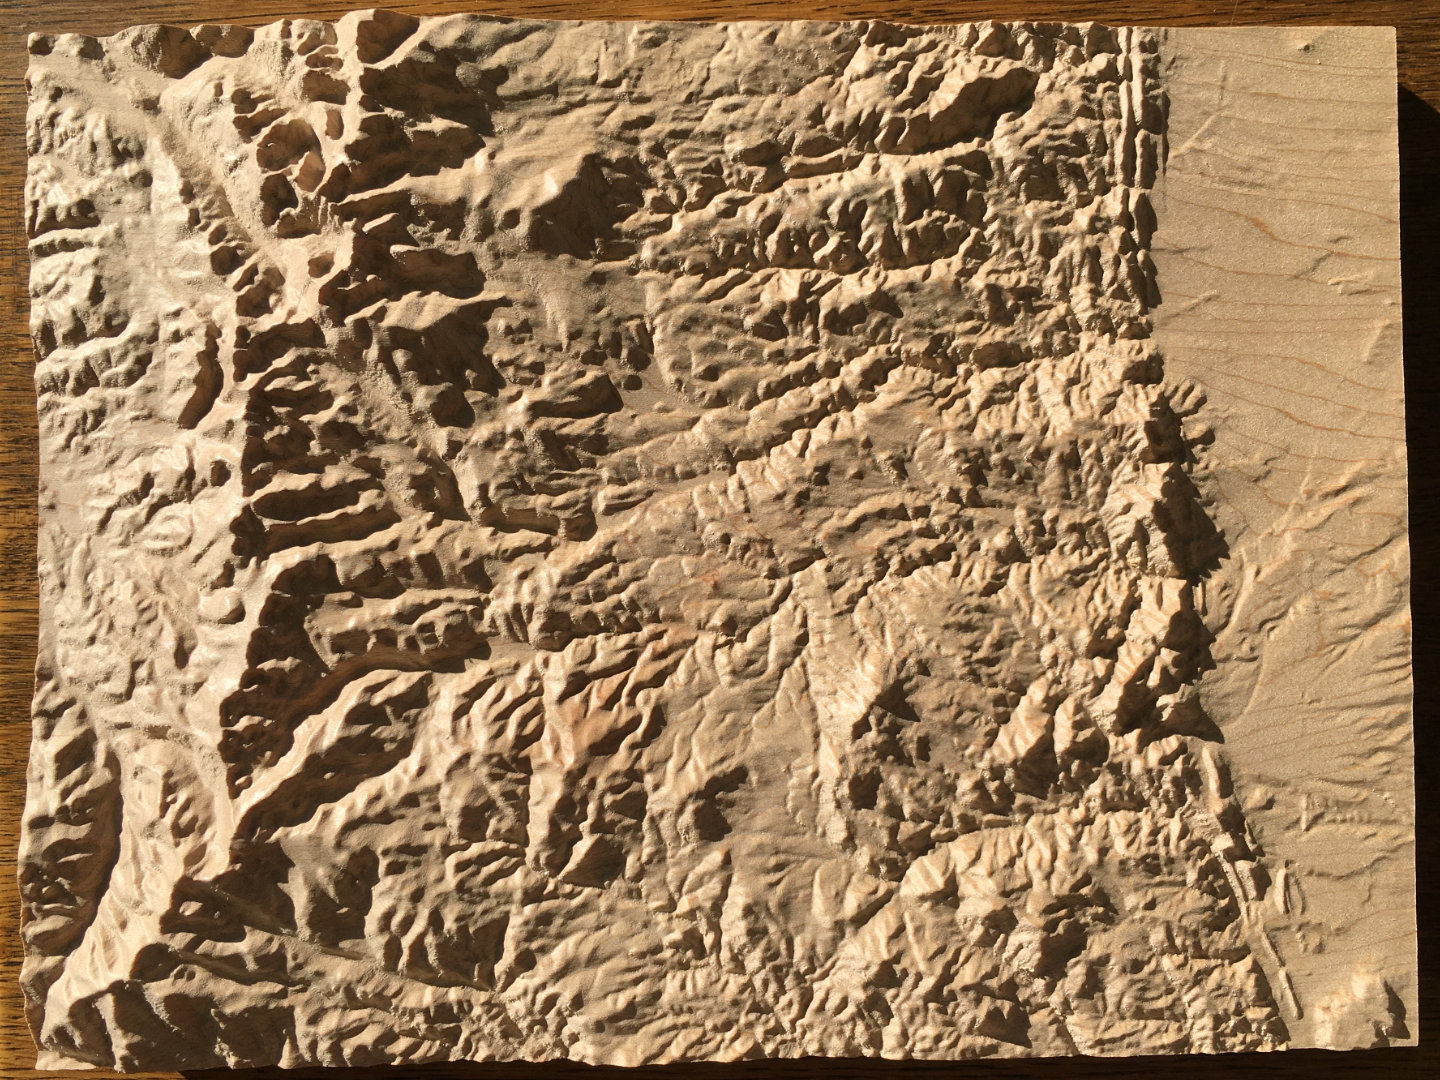 key to three-dimensional wood-carved relief map of the Rocky Mountains near Boulder, Colorado, United States